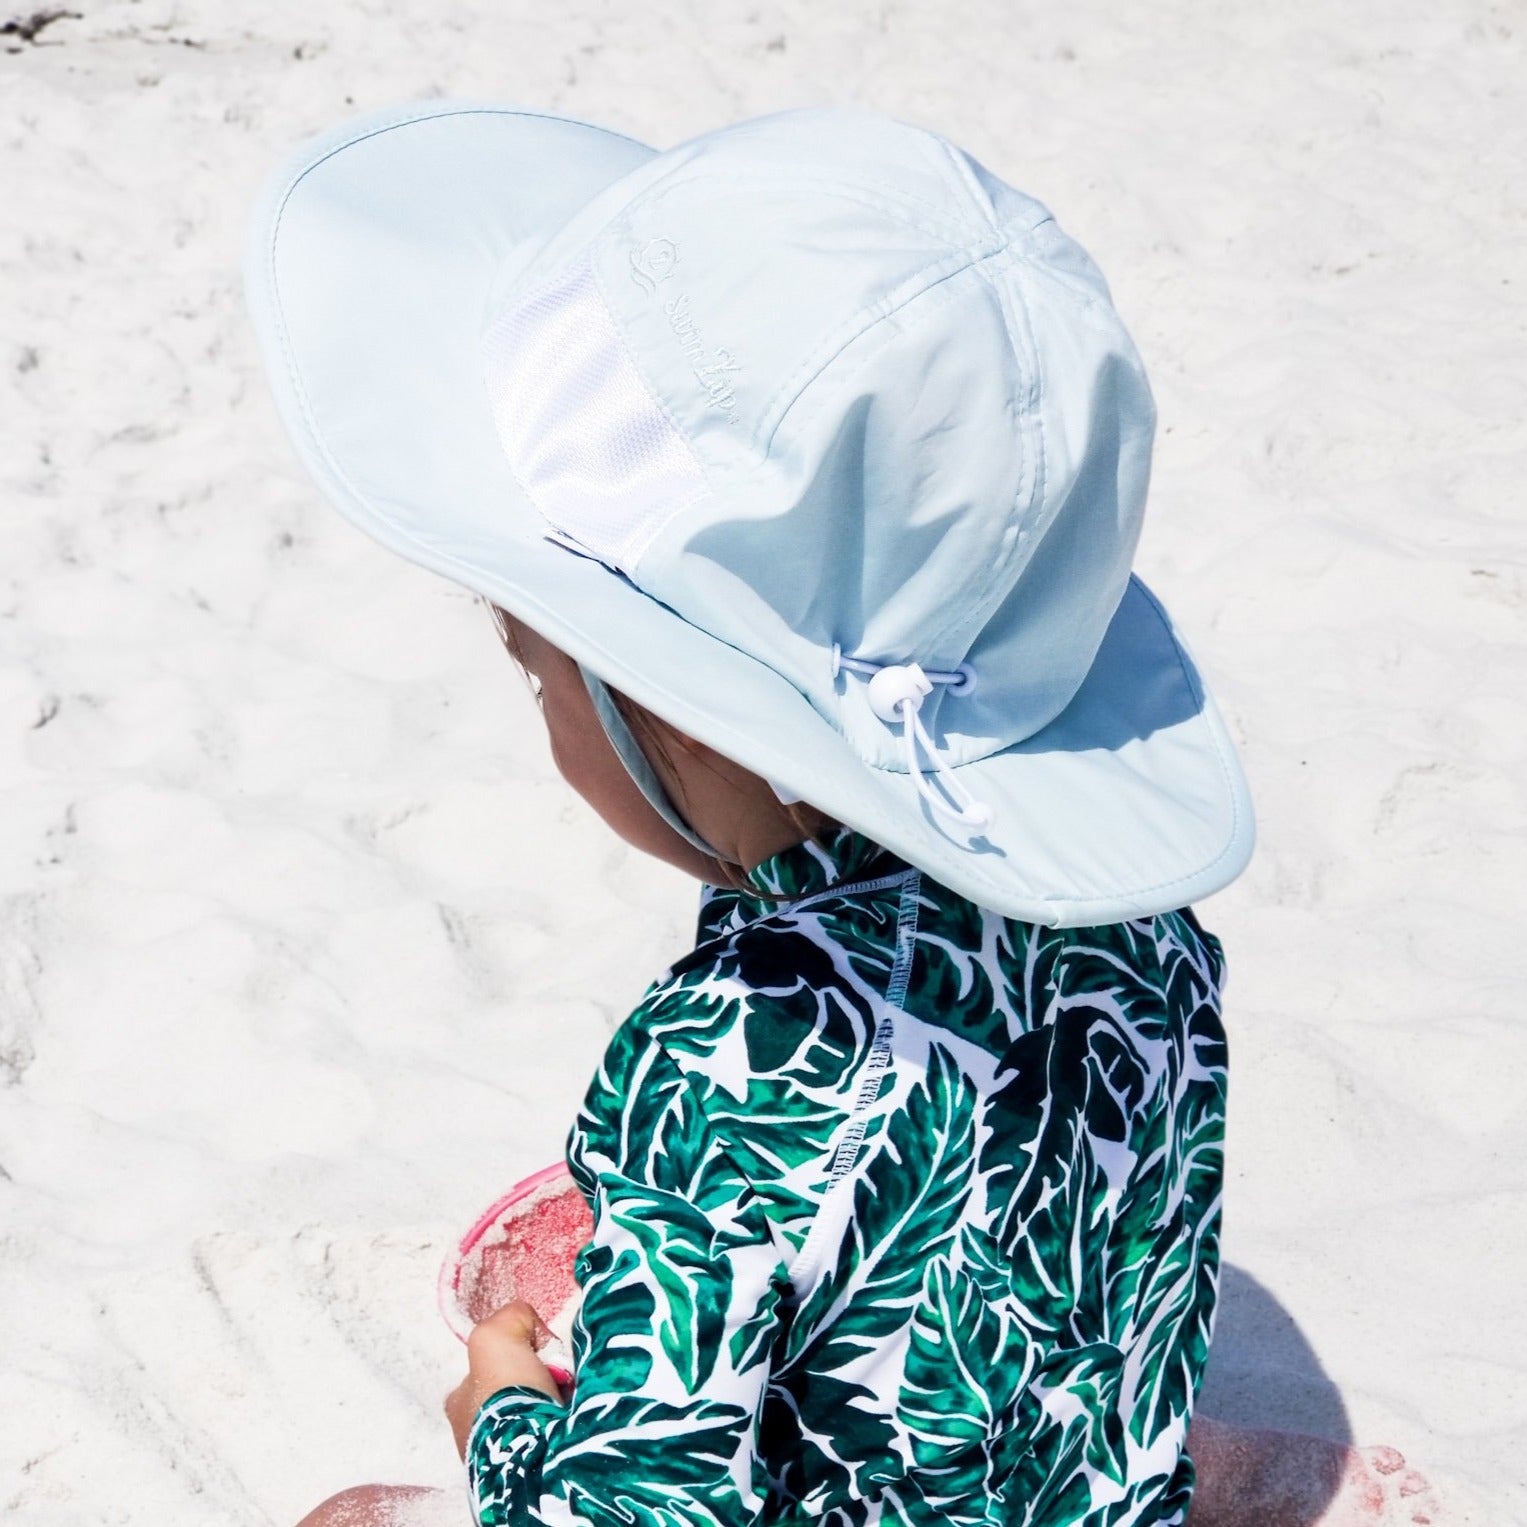 Sunscreen vs Sunhats: Which is better for protection?